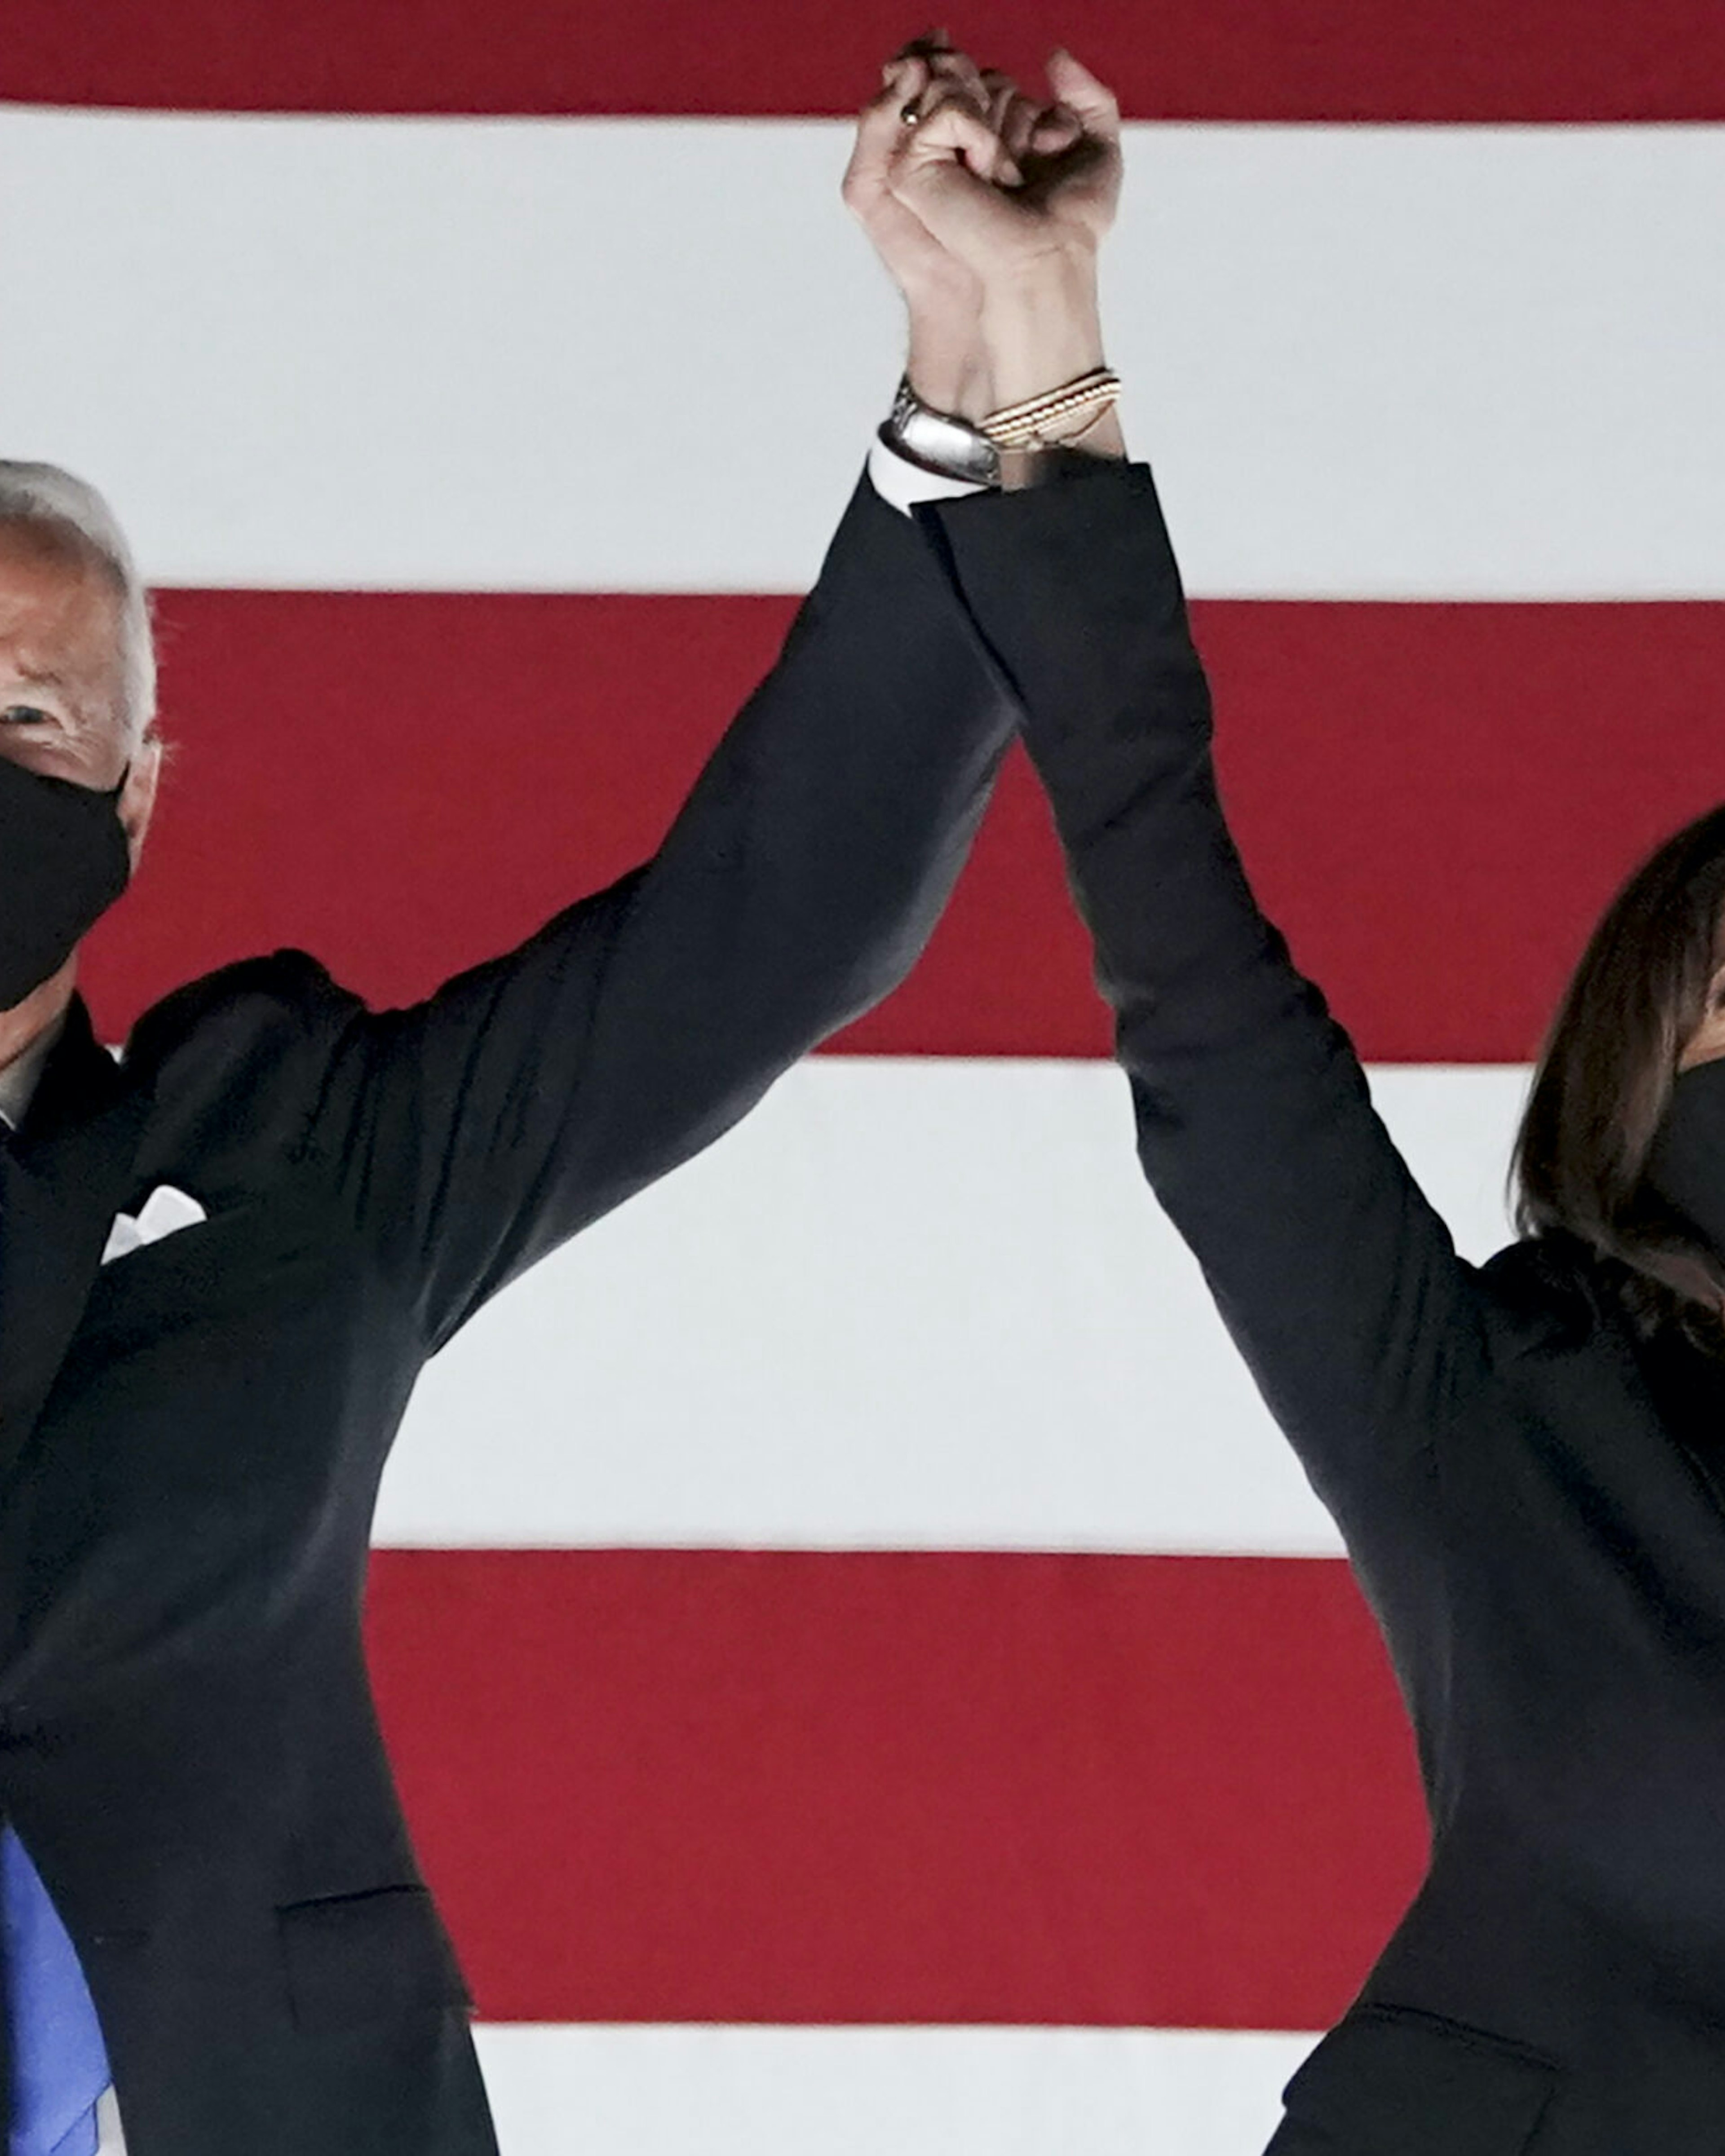 Former Vice President Joe Biden, Democratic presidential nominee, left, and Senator Kamala Harris, Democratic vice presidential nominee, wear protective masks while holding hands outside the Chase Center during the Democratic National Convention in Wilmington, Delaware, U.S., on Thursday, Aug. 20, 2020. Biden accepted the Democratic nomination to challenge President Donald Trump, urging Americans in a prime-time address to vote for new national leadership that will overcome deep U.S. political divisions. Photographer: Stefani Reynolds/Bloomberg